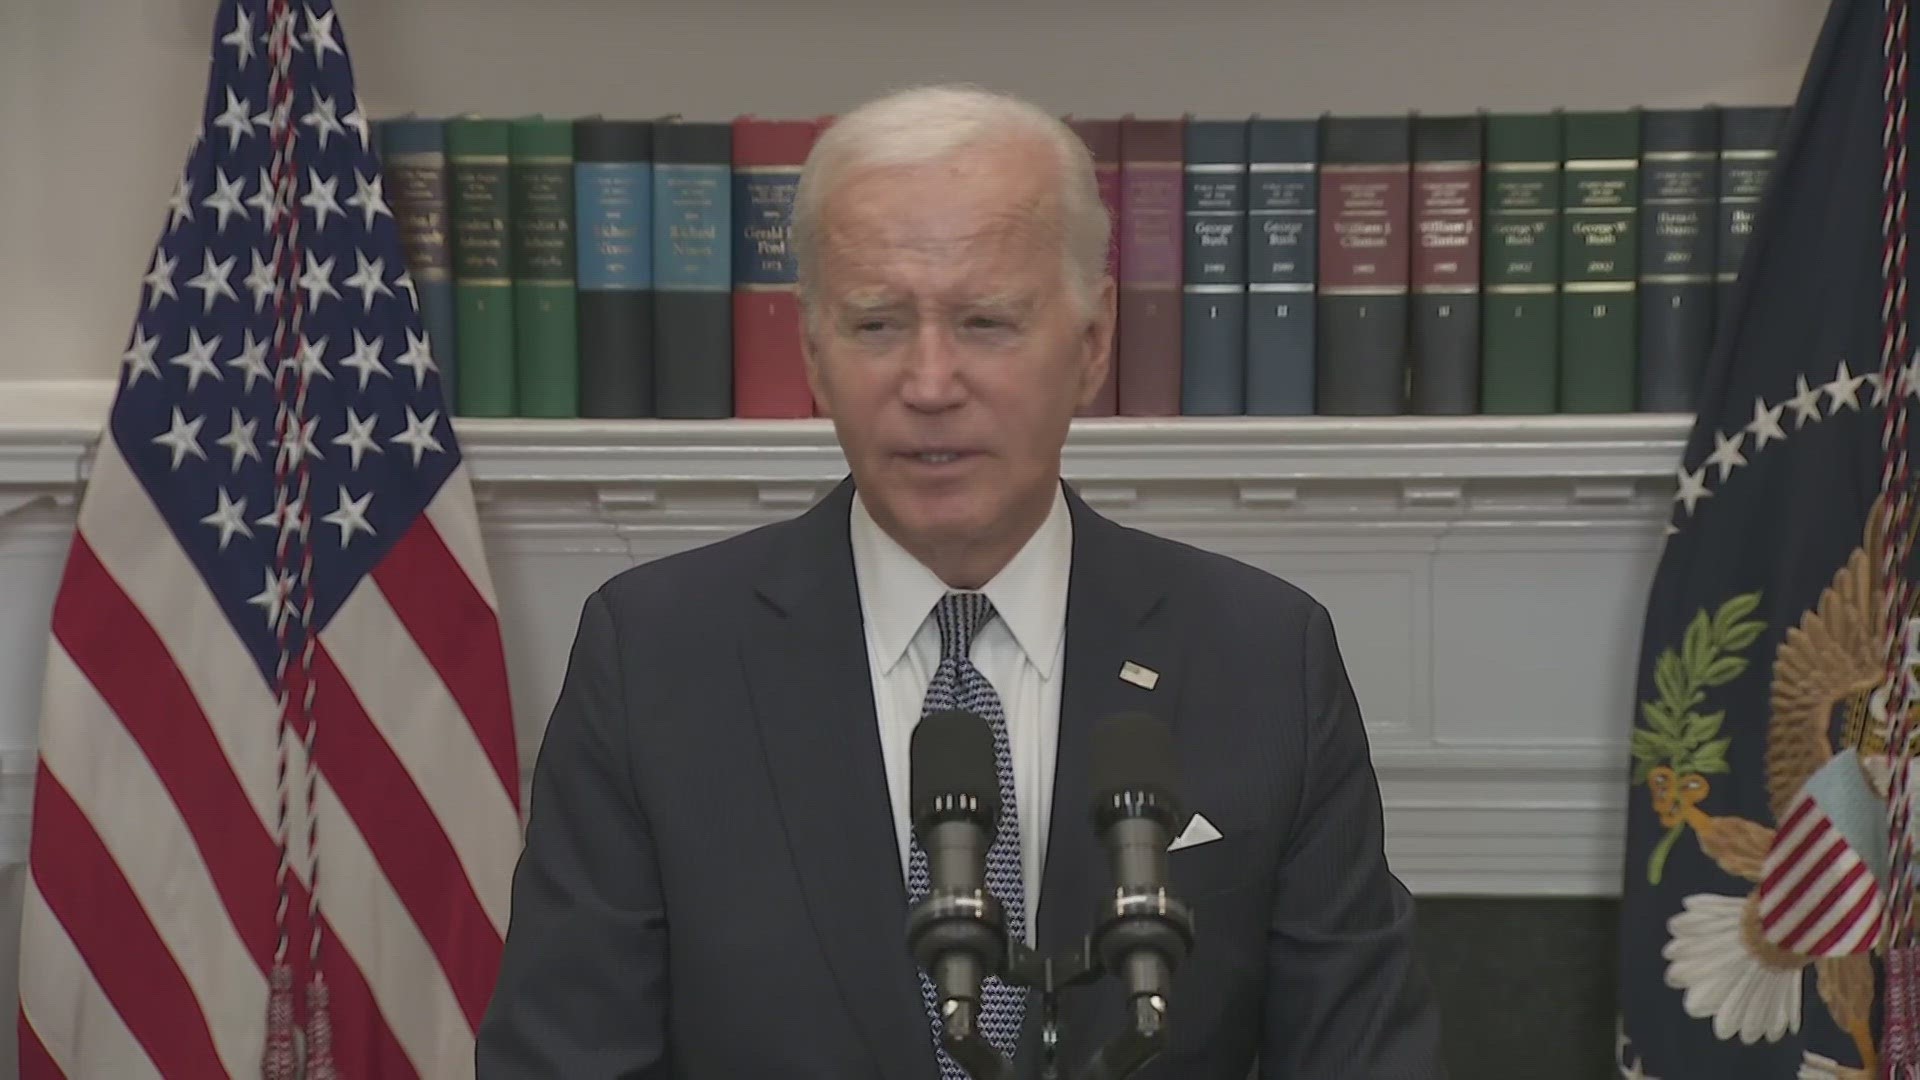 Hours after the Supreme Court ruling, Biden commented from the White House, trying to stay on the political offensive even as the ruling undermined a key promise.